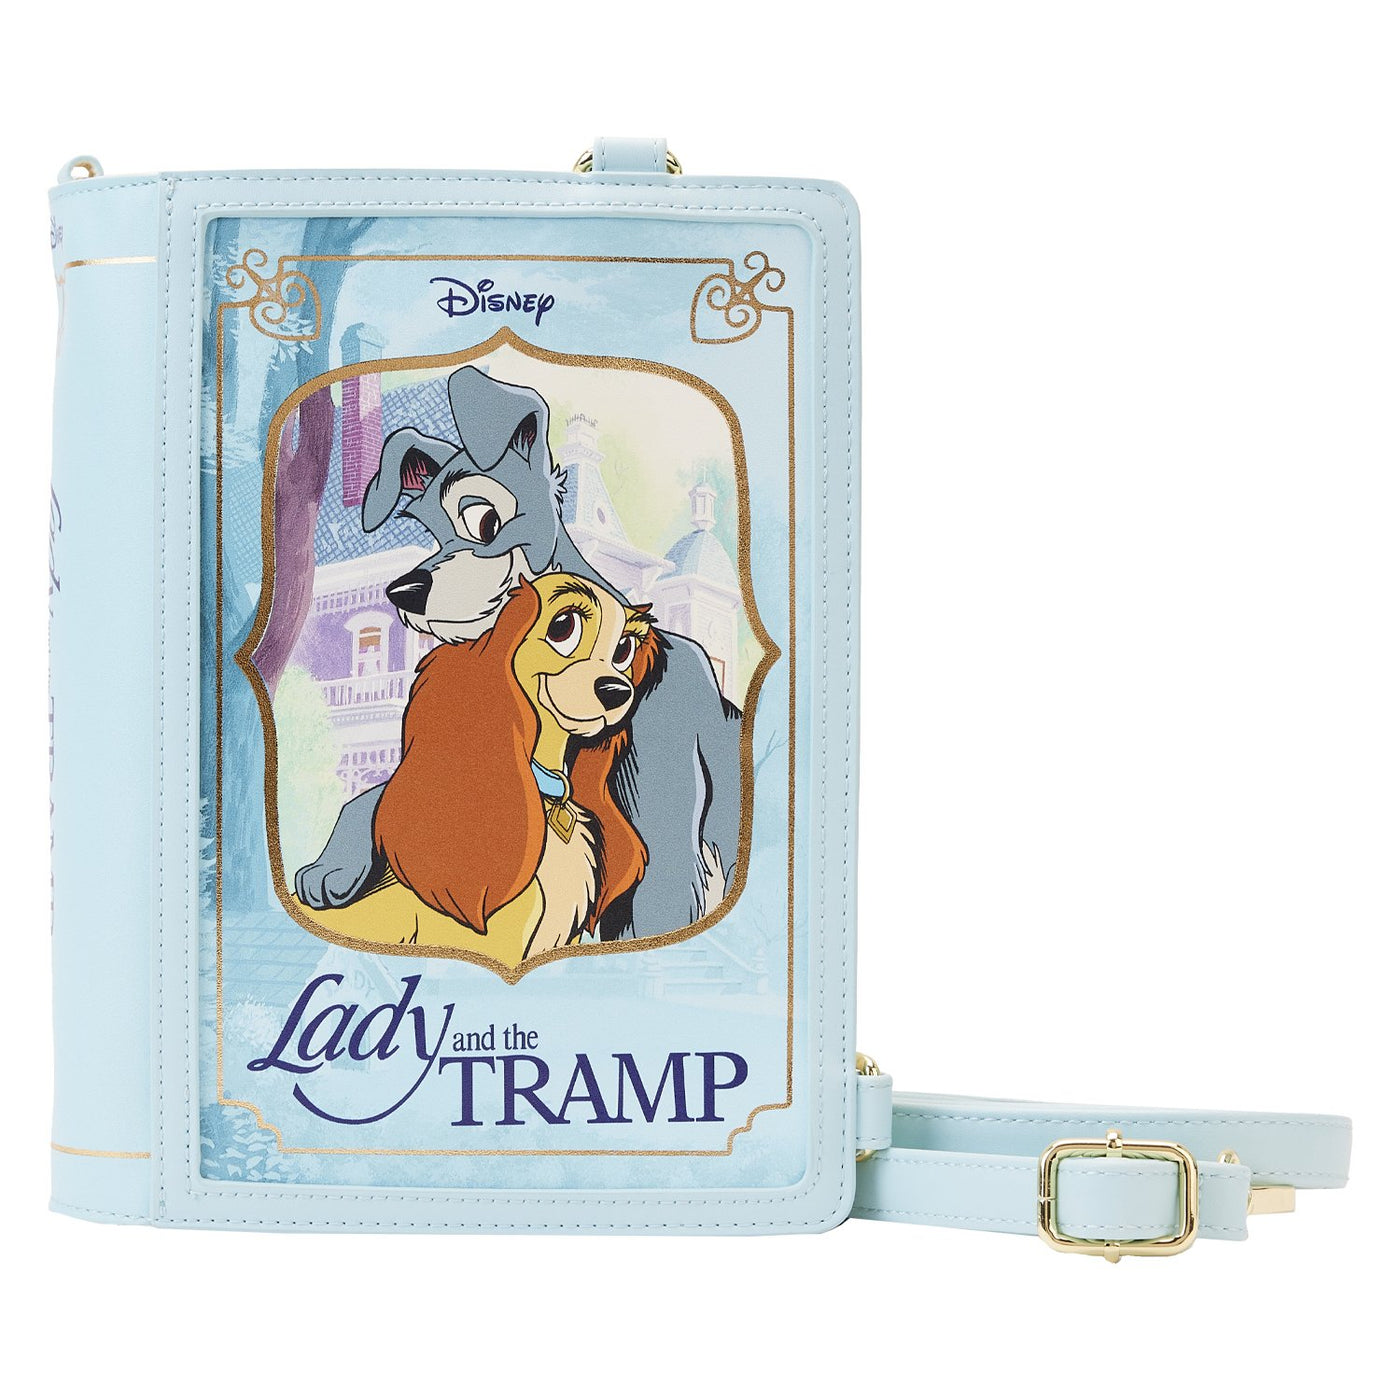 671803448377 - Loungefly Disney Lady and the Tramp Classic Book Convertible Crossbody - Front